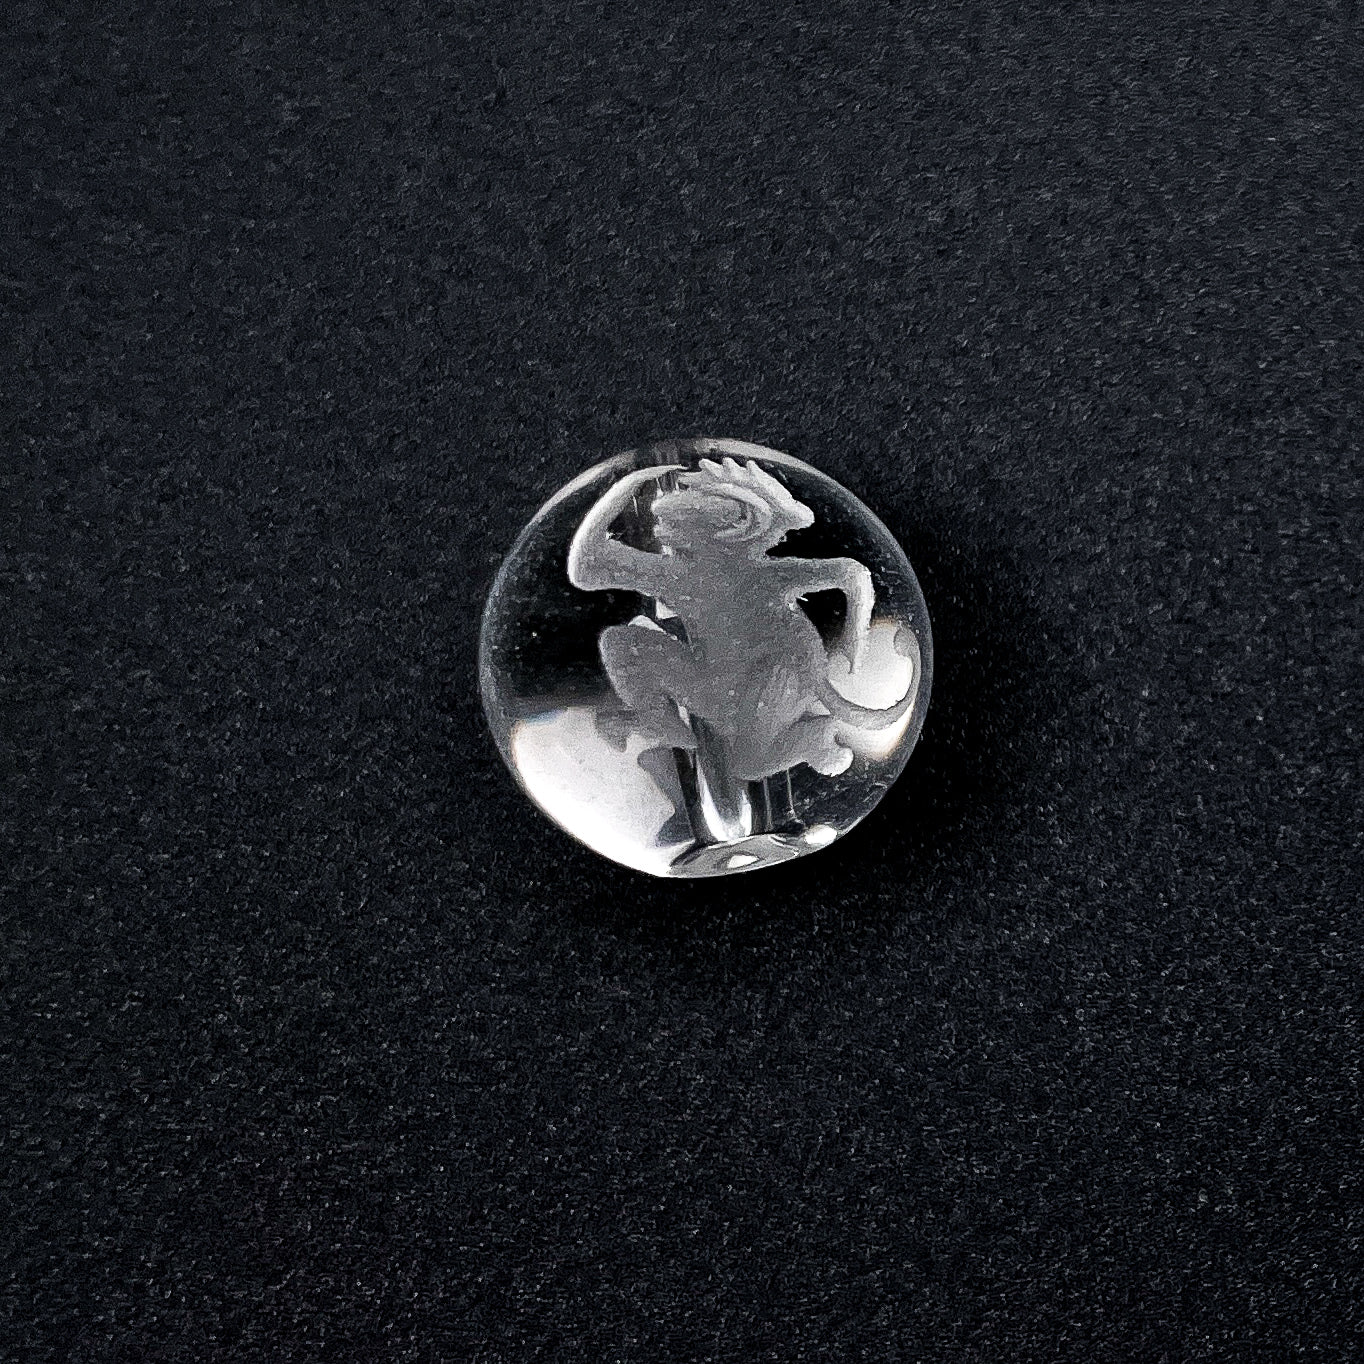 Crystal Quartz 12mm Round with Etched Monkey Bead - 1 pc.